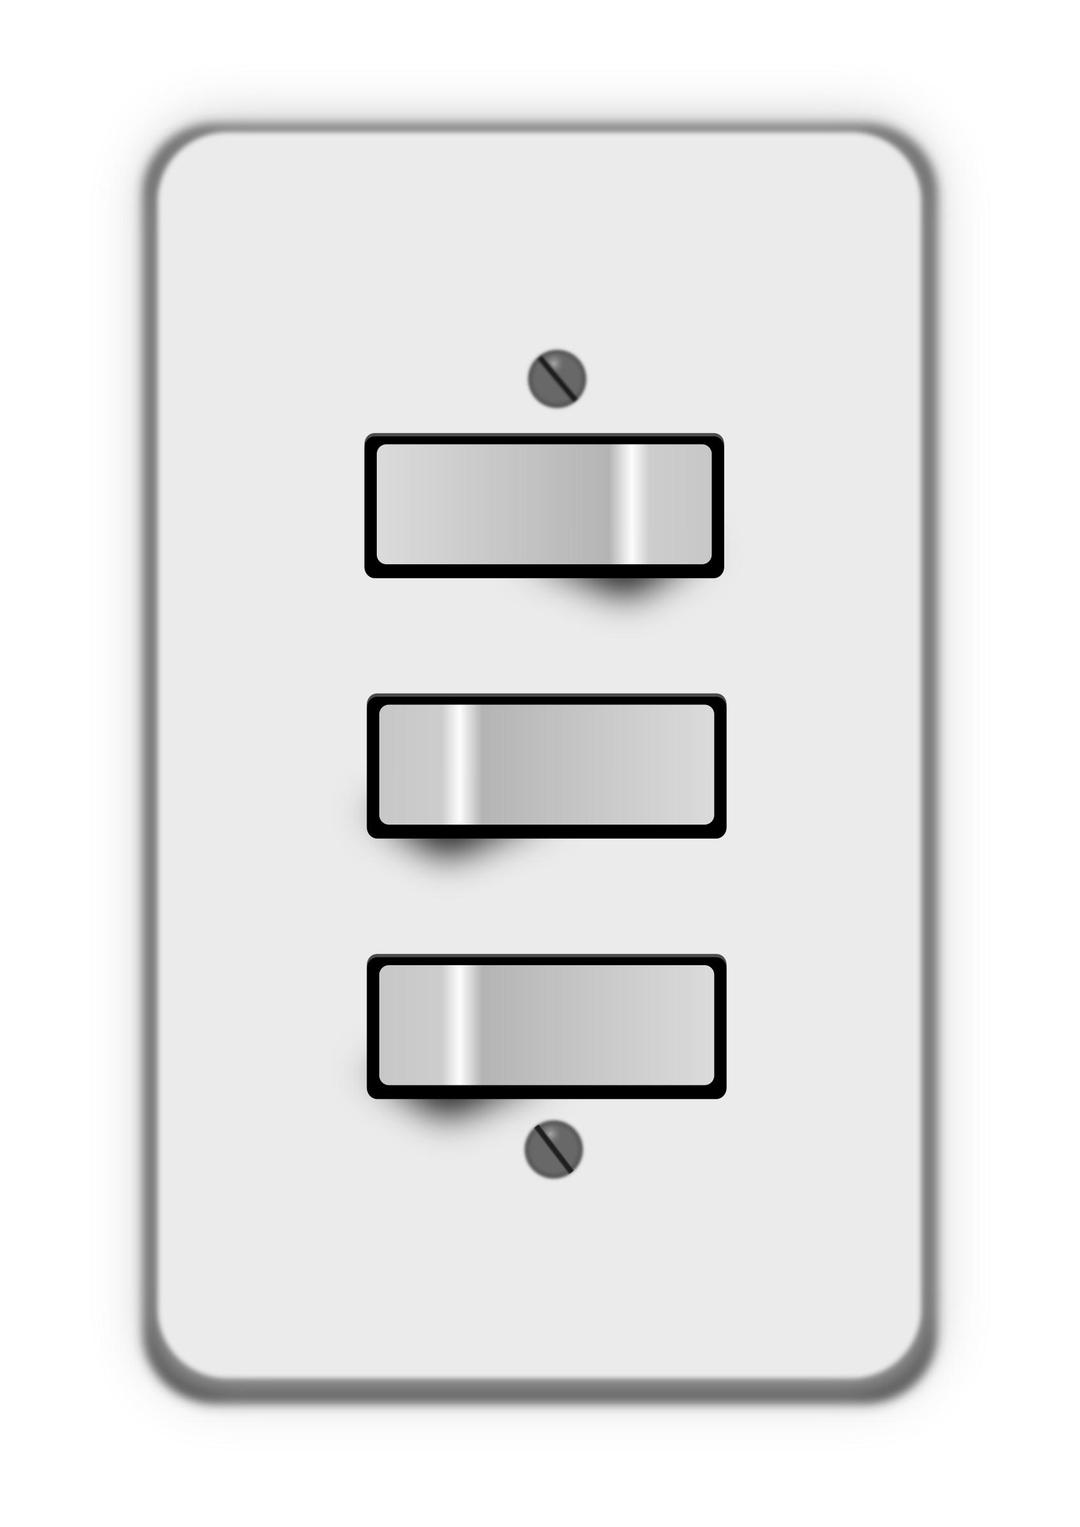 Light switch, 3 switches (one off) png transparent